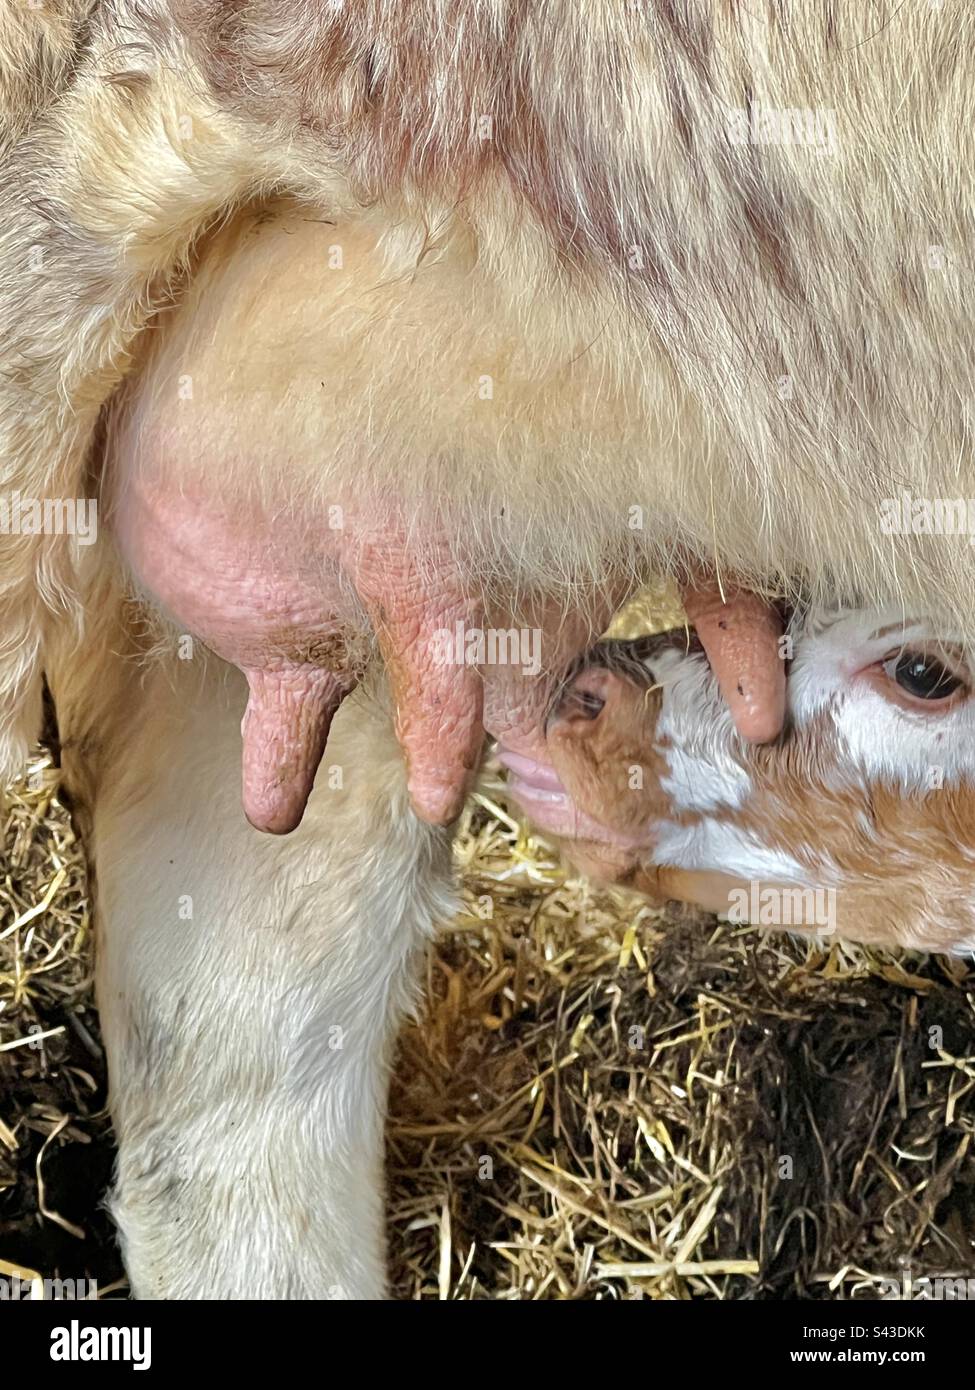 Young calf suckling on mother cow udder Stock Photo